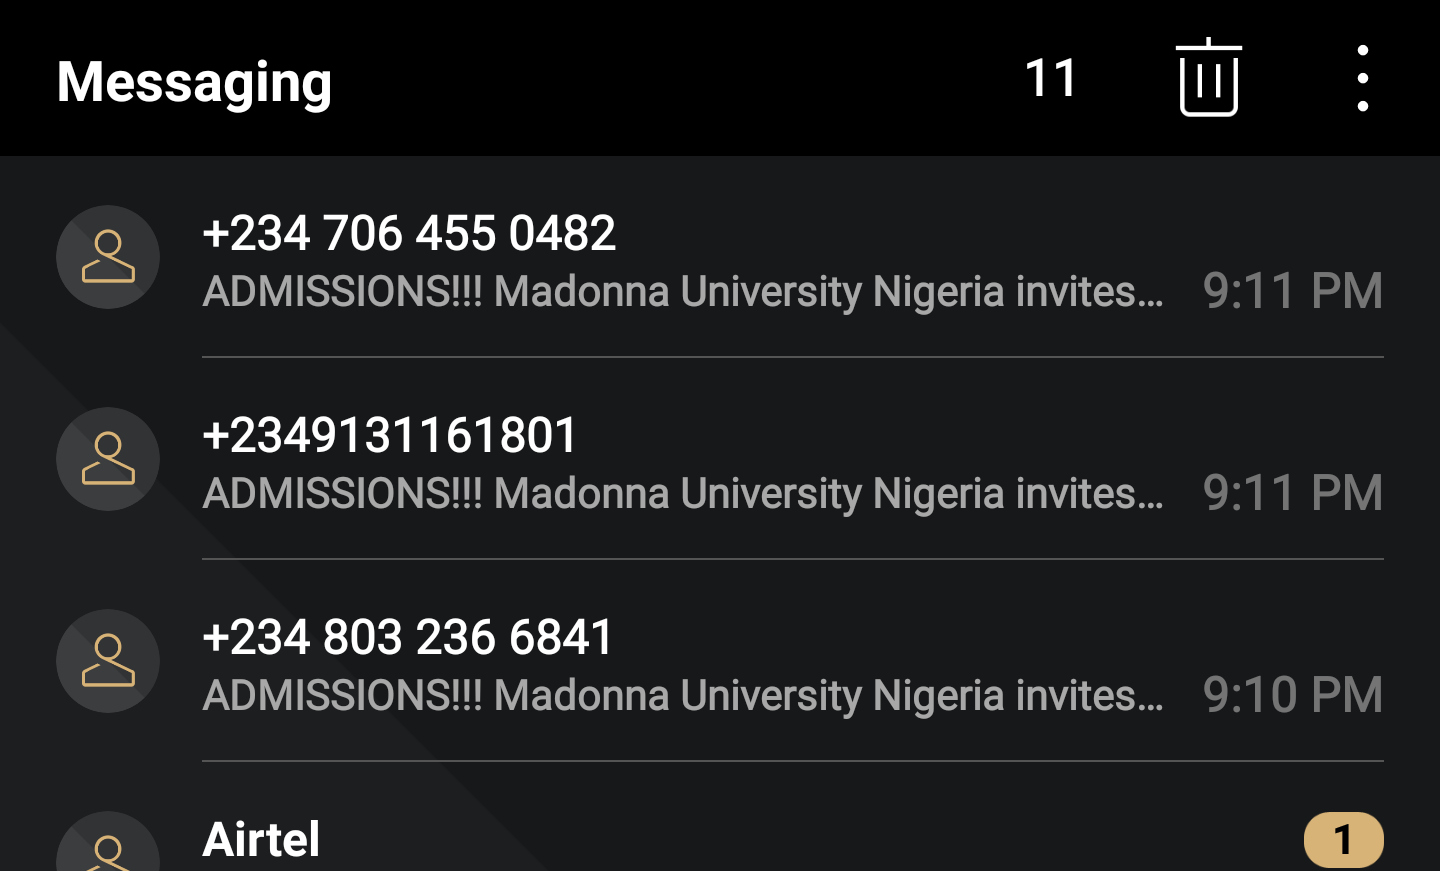 Is Madonna University The New Format? Education Nigeria